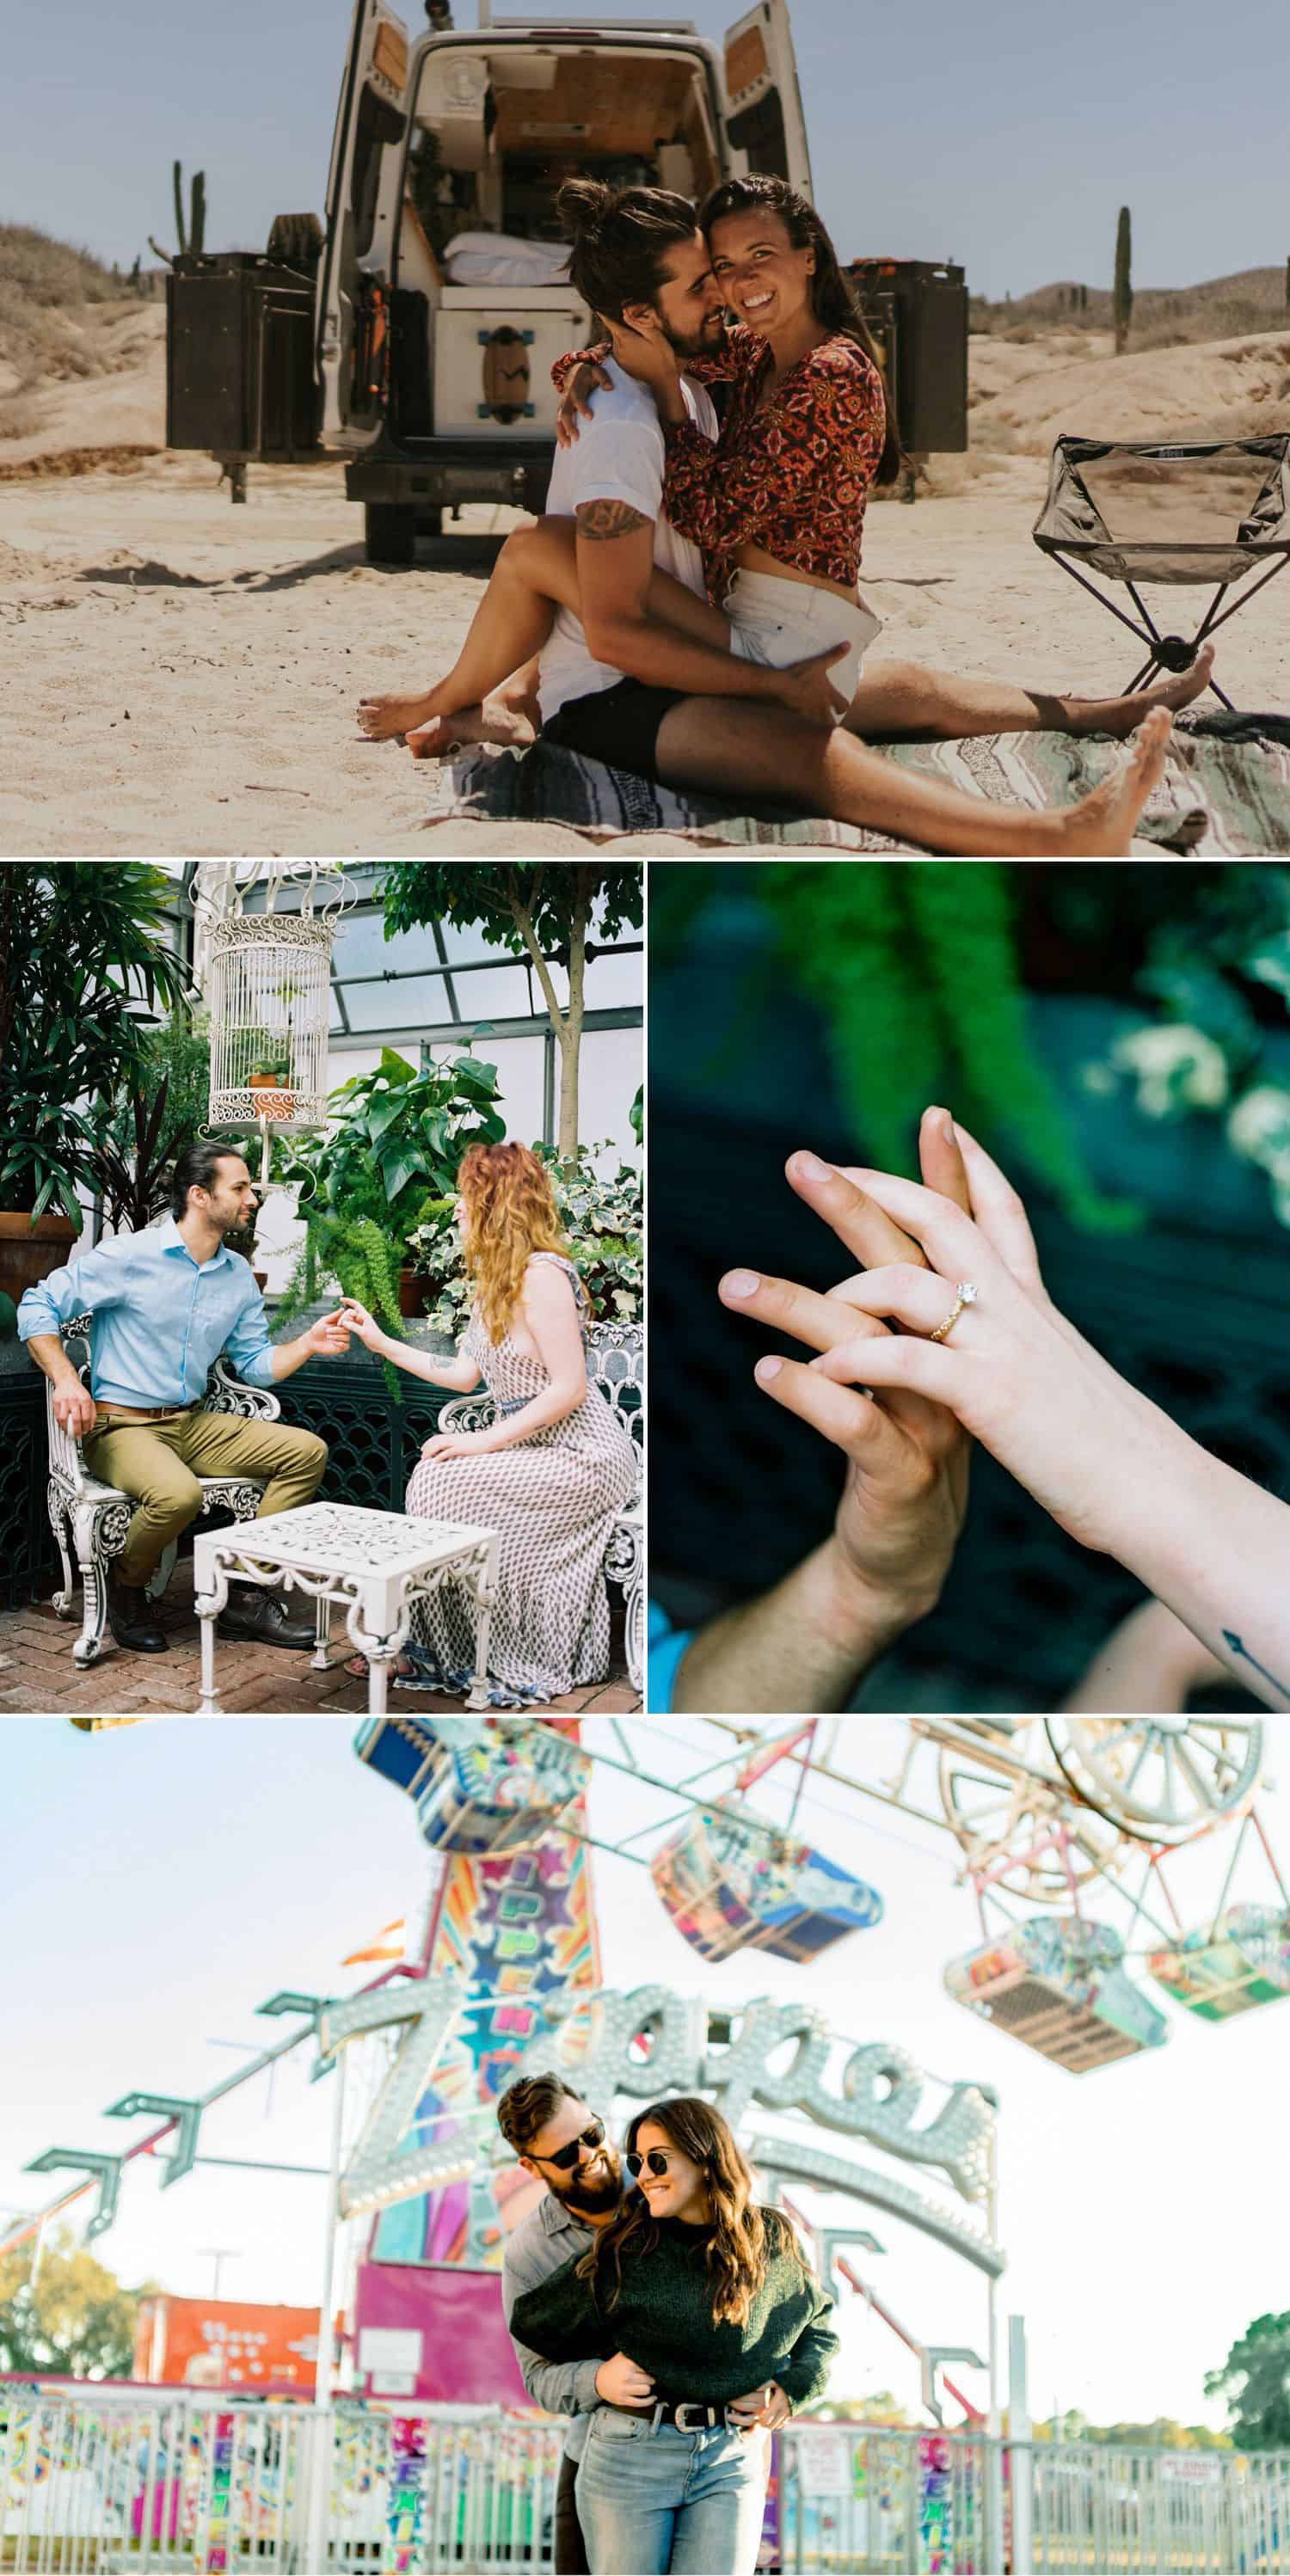 Use creative engagement photo poses and scenes to tell a story